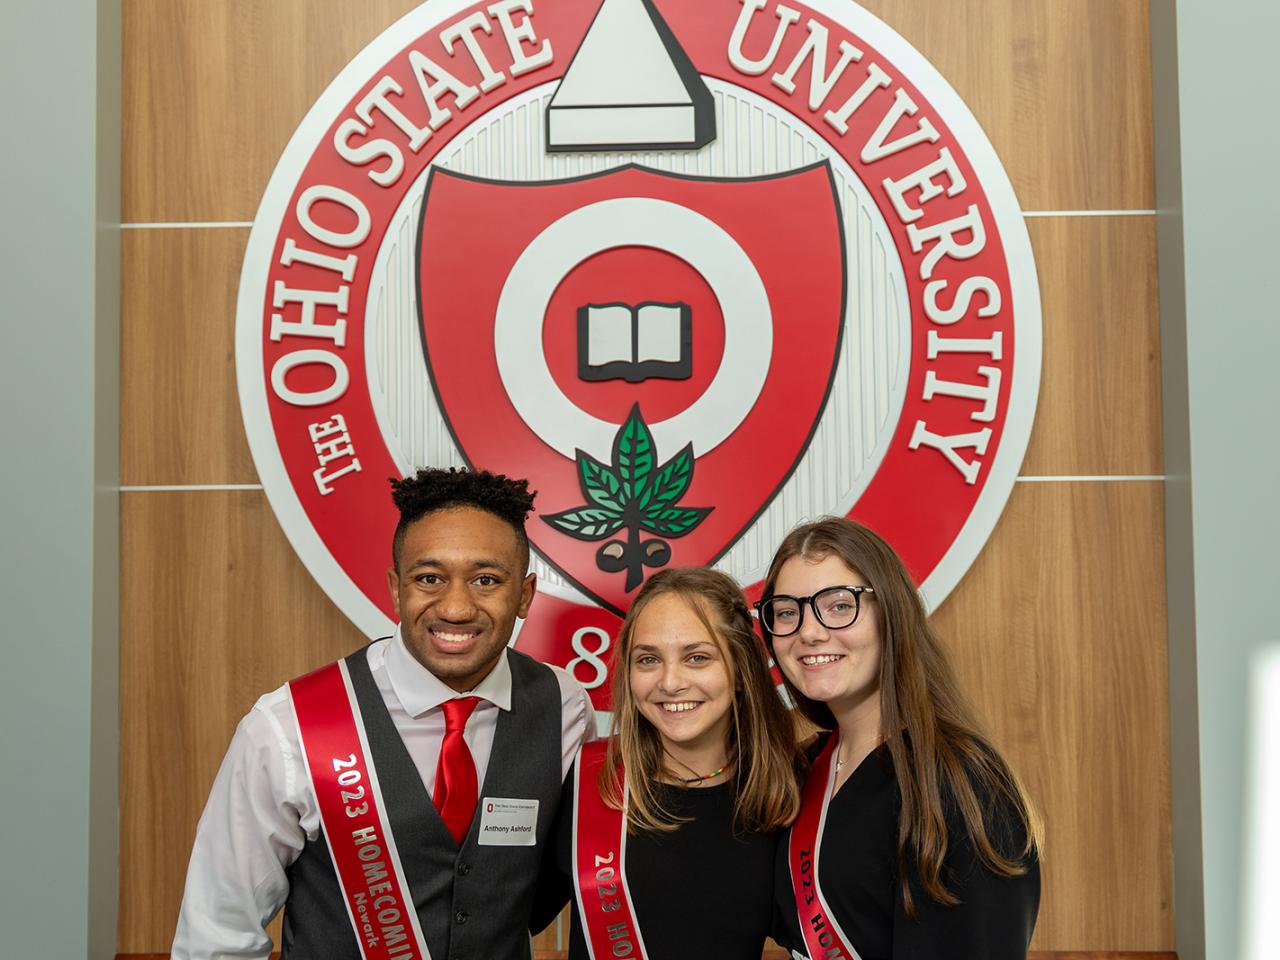 Three members of the Homecoming court stand in front of the university seal at the Longaberger Alumni House.